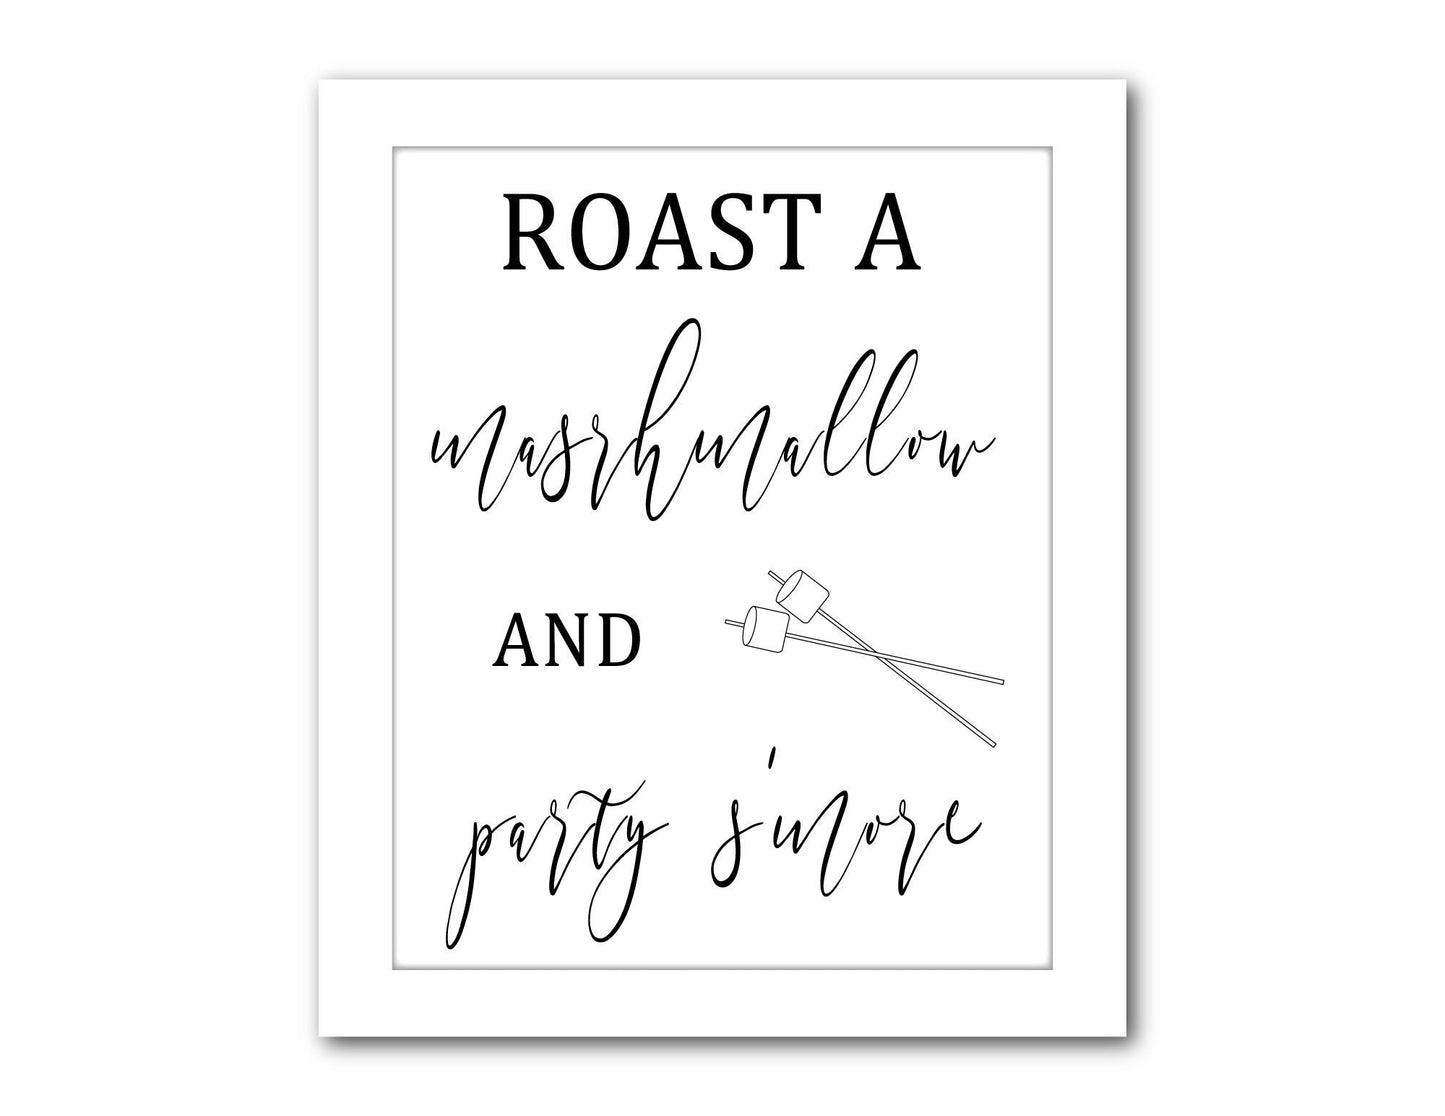 Printable roast a marshmallow and party s'more sign